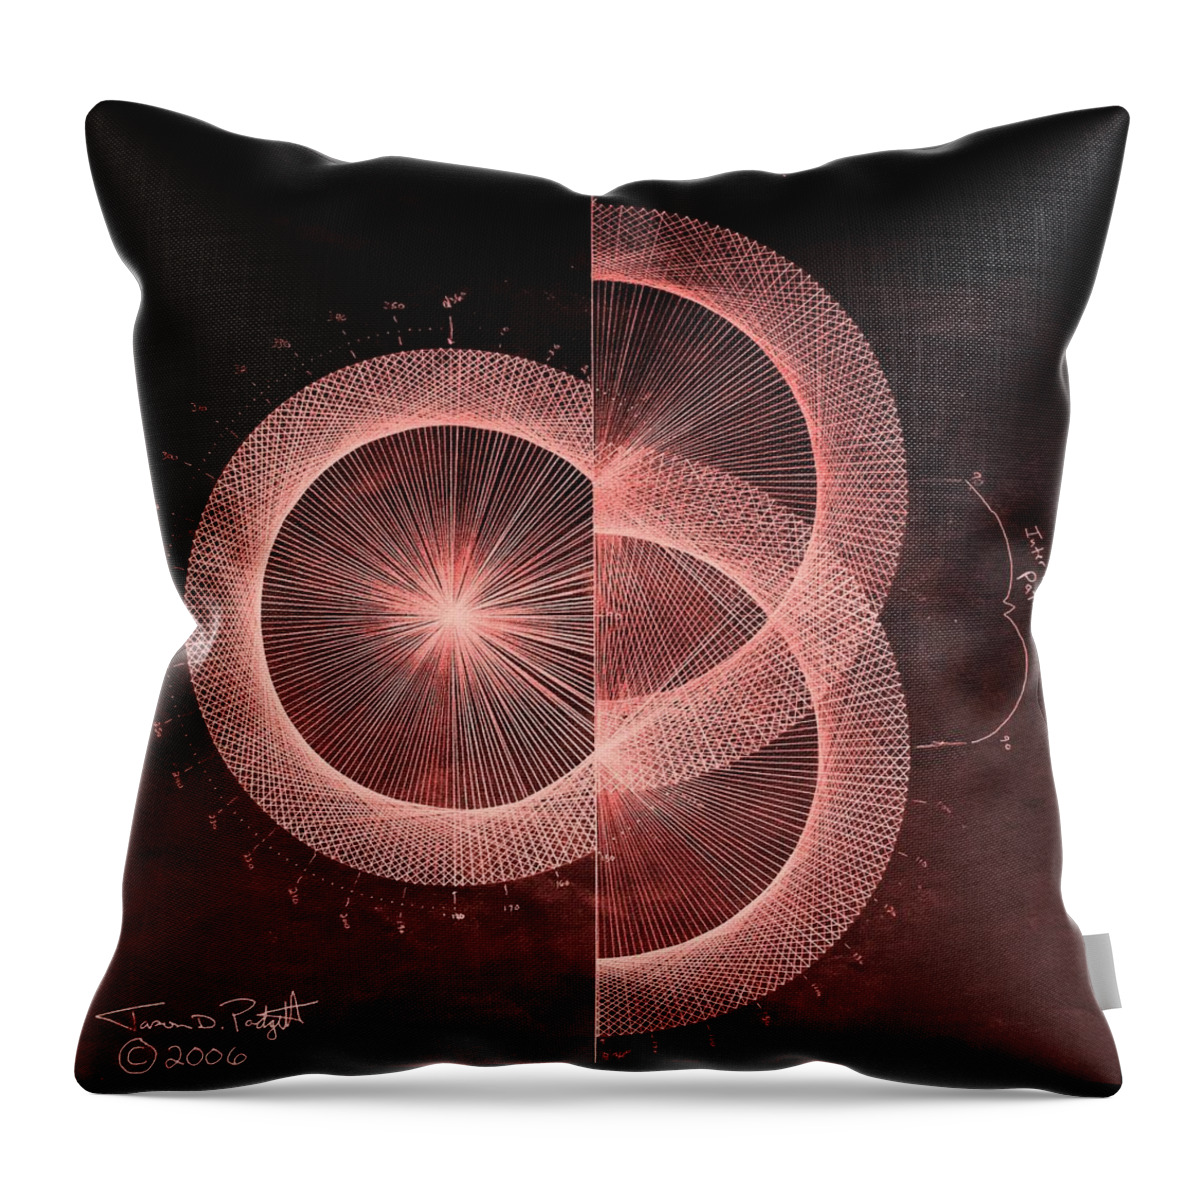 Jason Throw Pillow featuring the drawing Double Slit Test by Jason Padgett